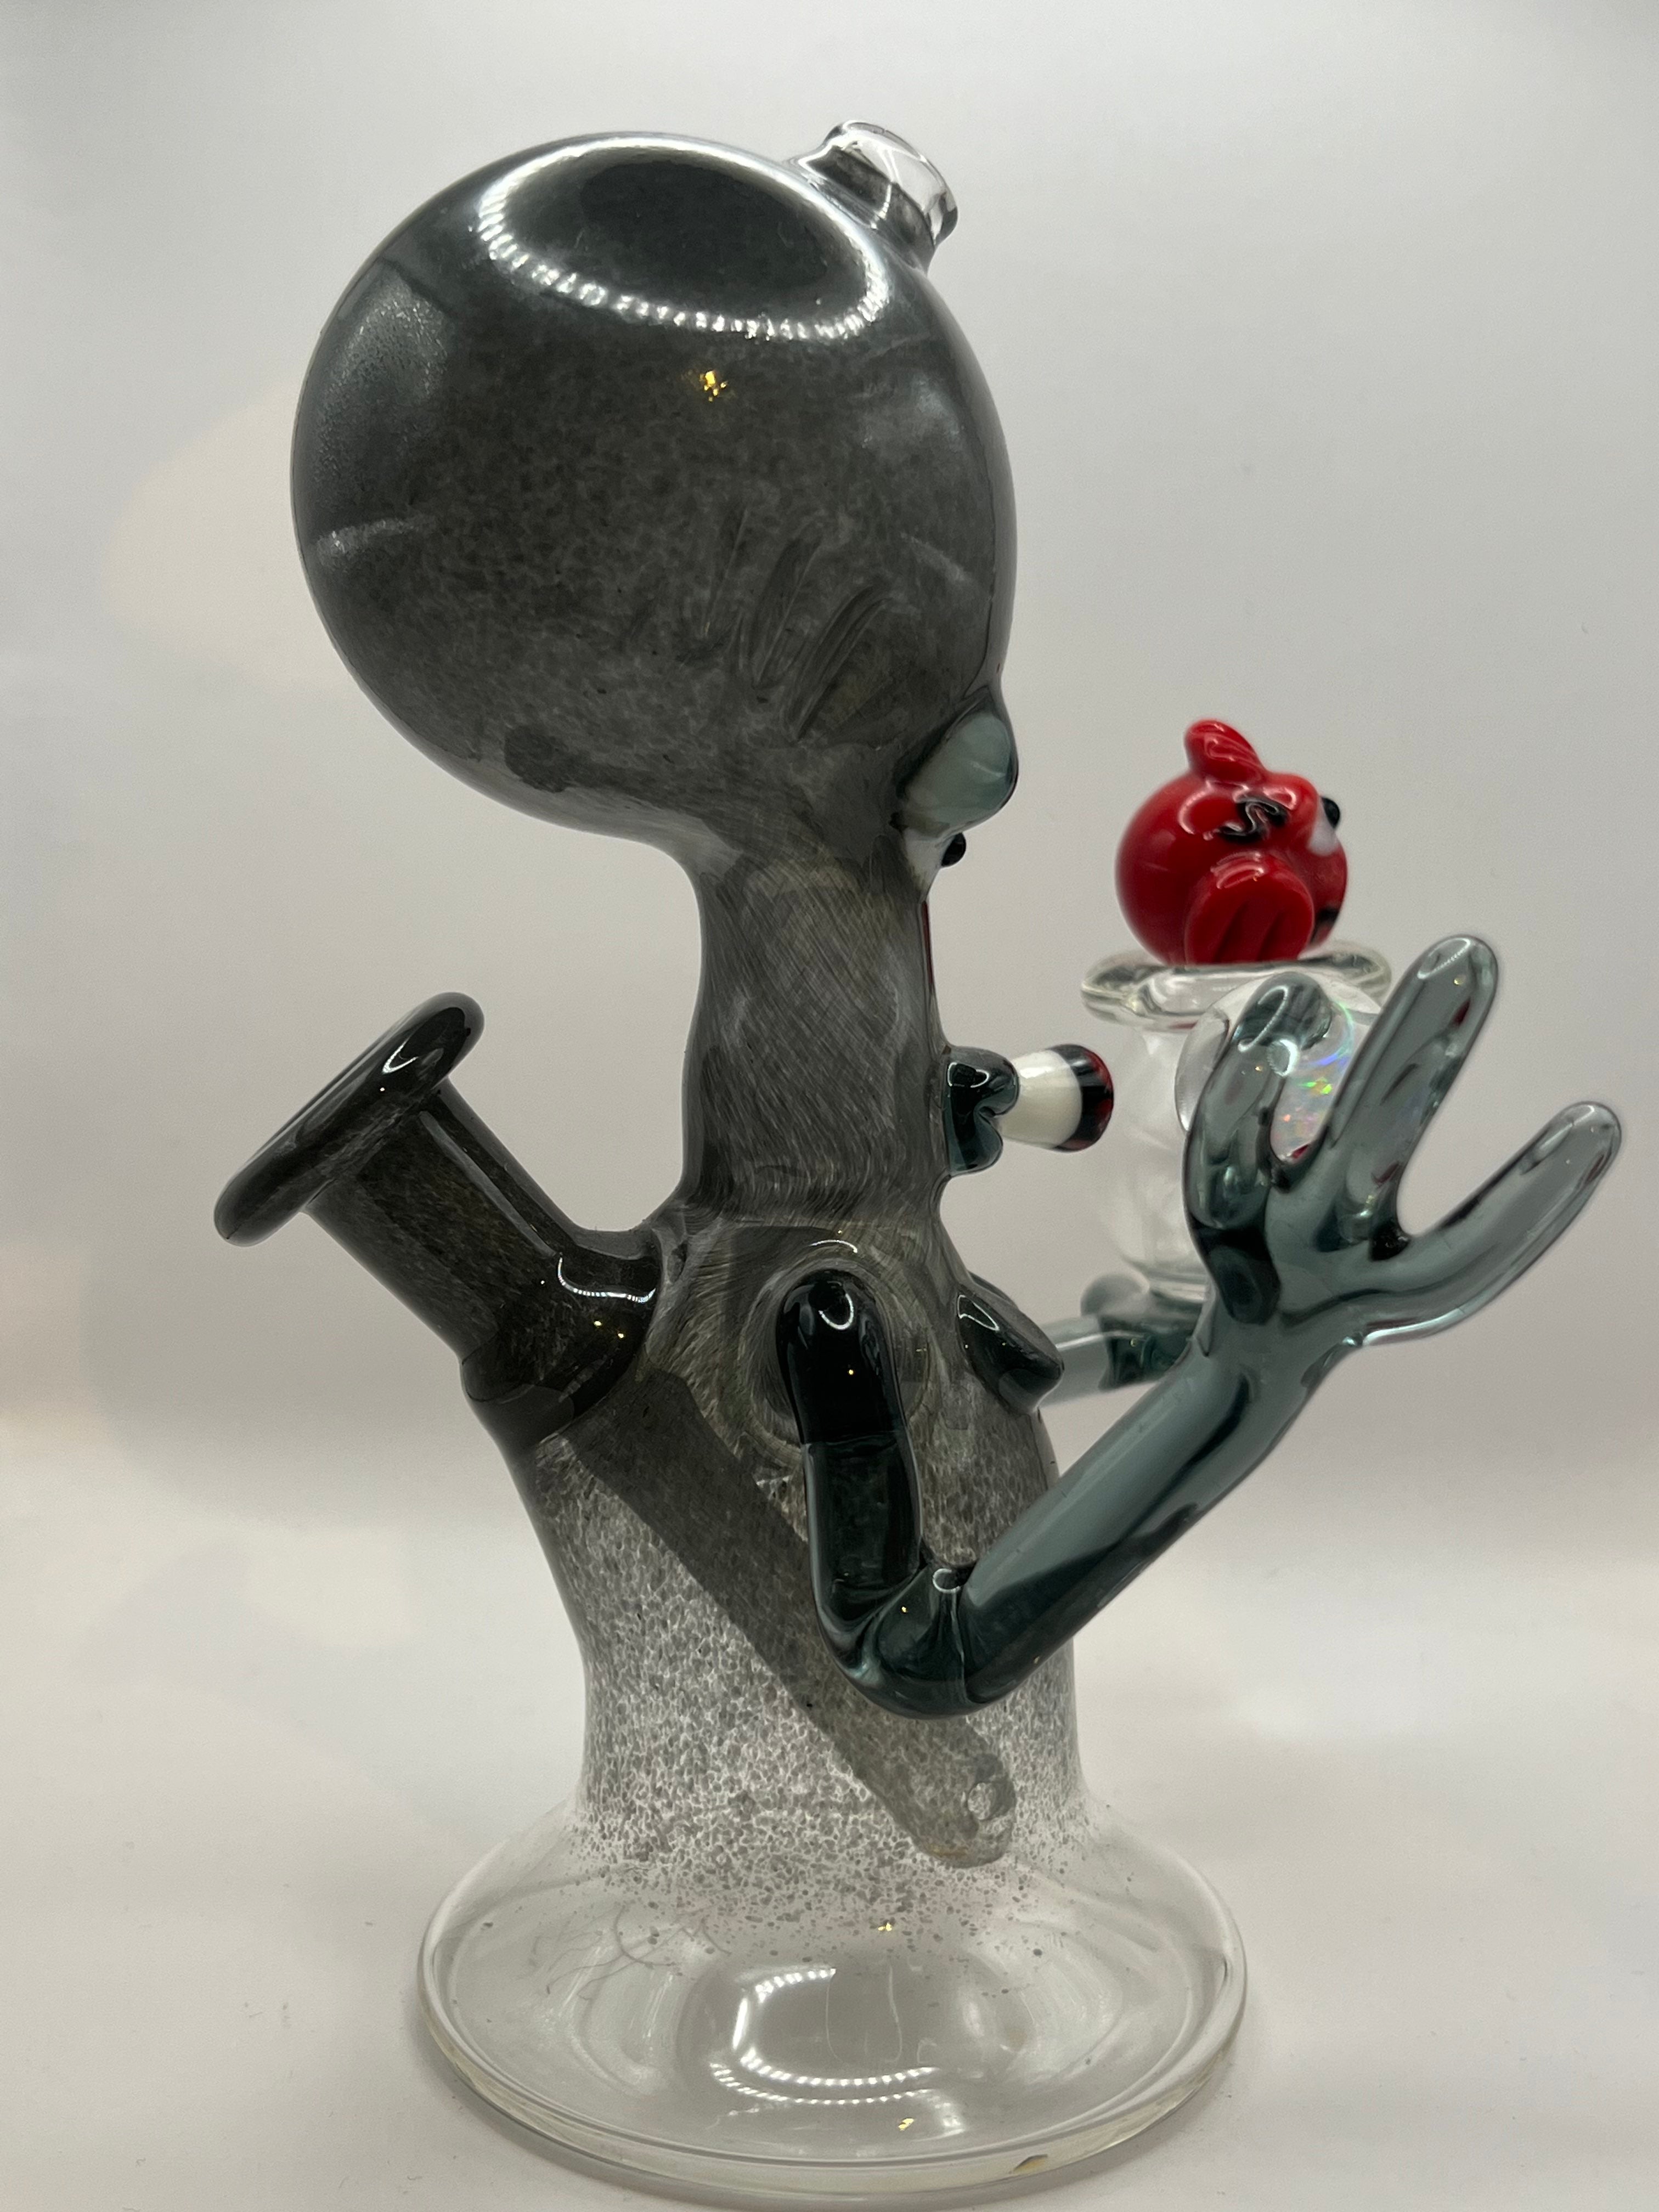 Roger by PuffGlass